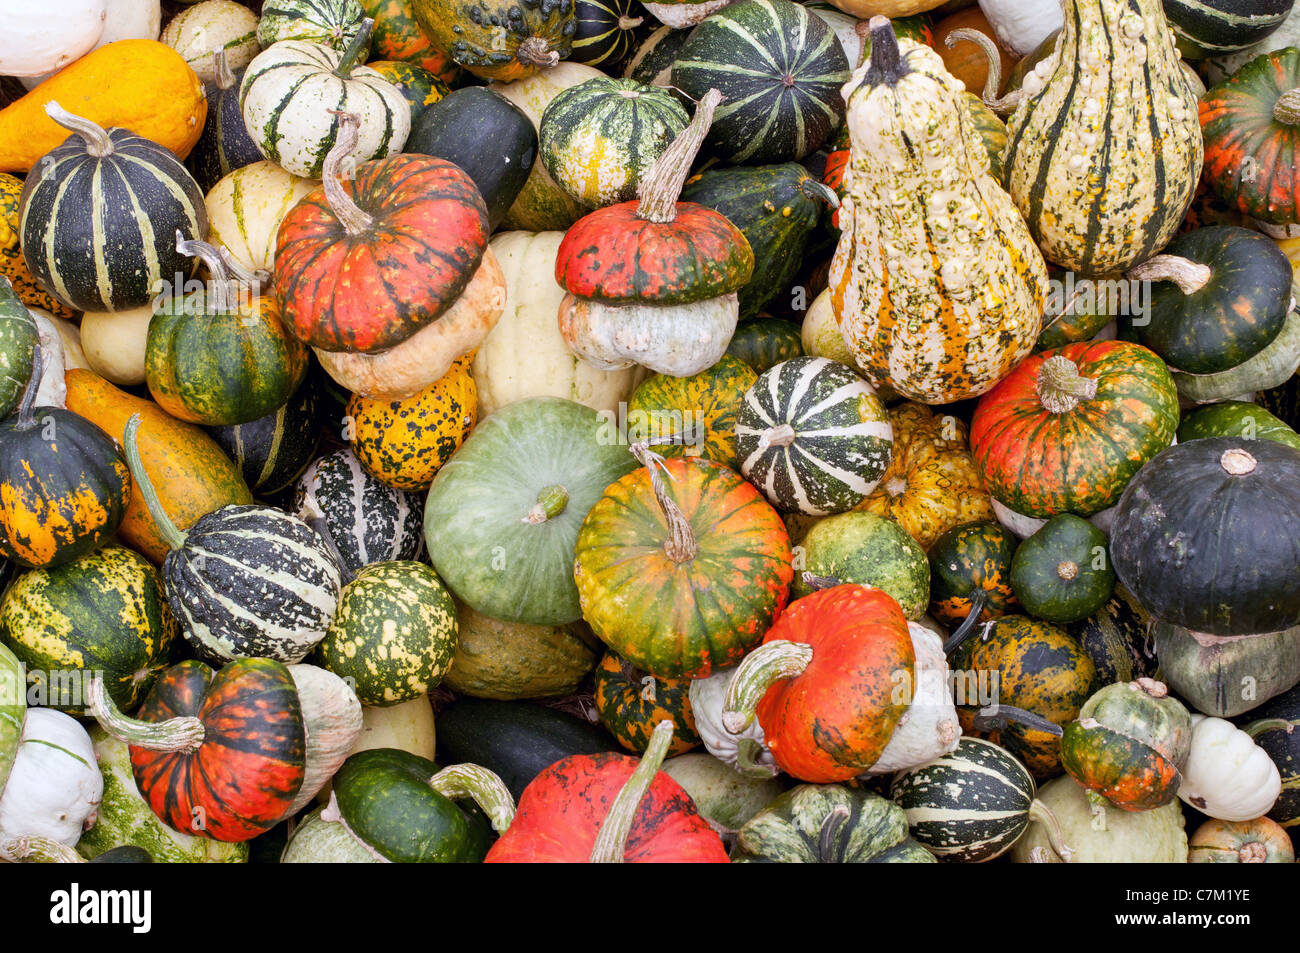 Colorful pumpkins assortment on the market Stock Photo